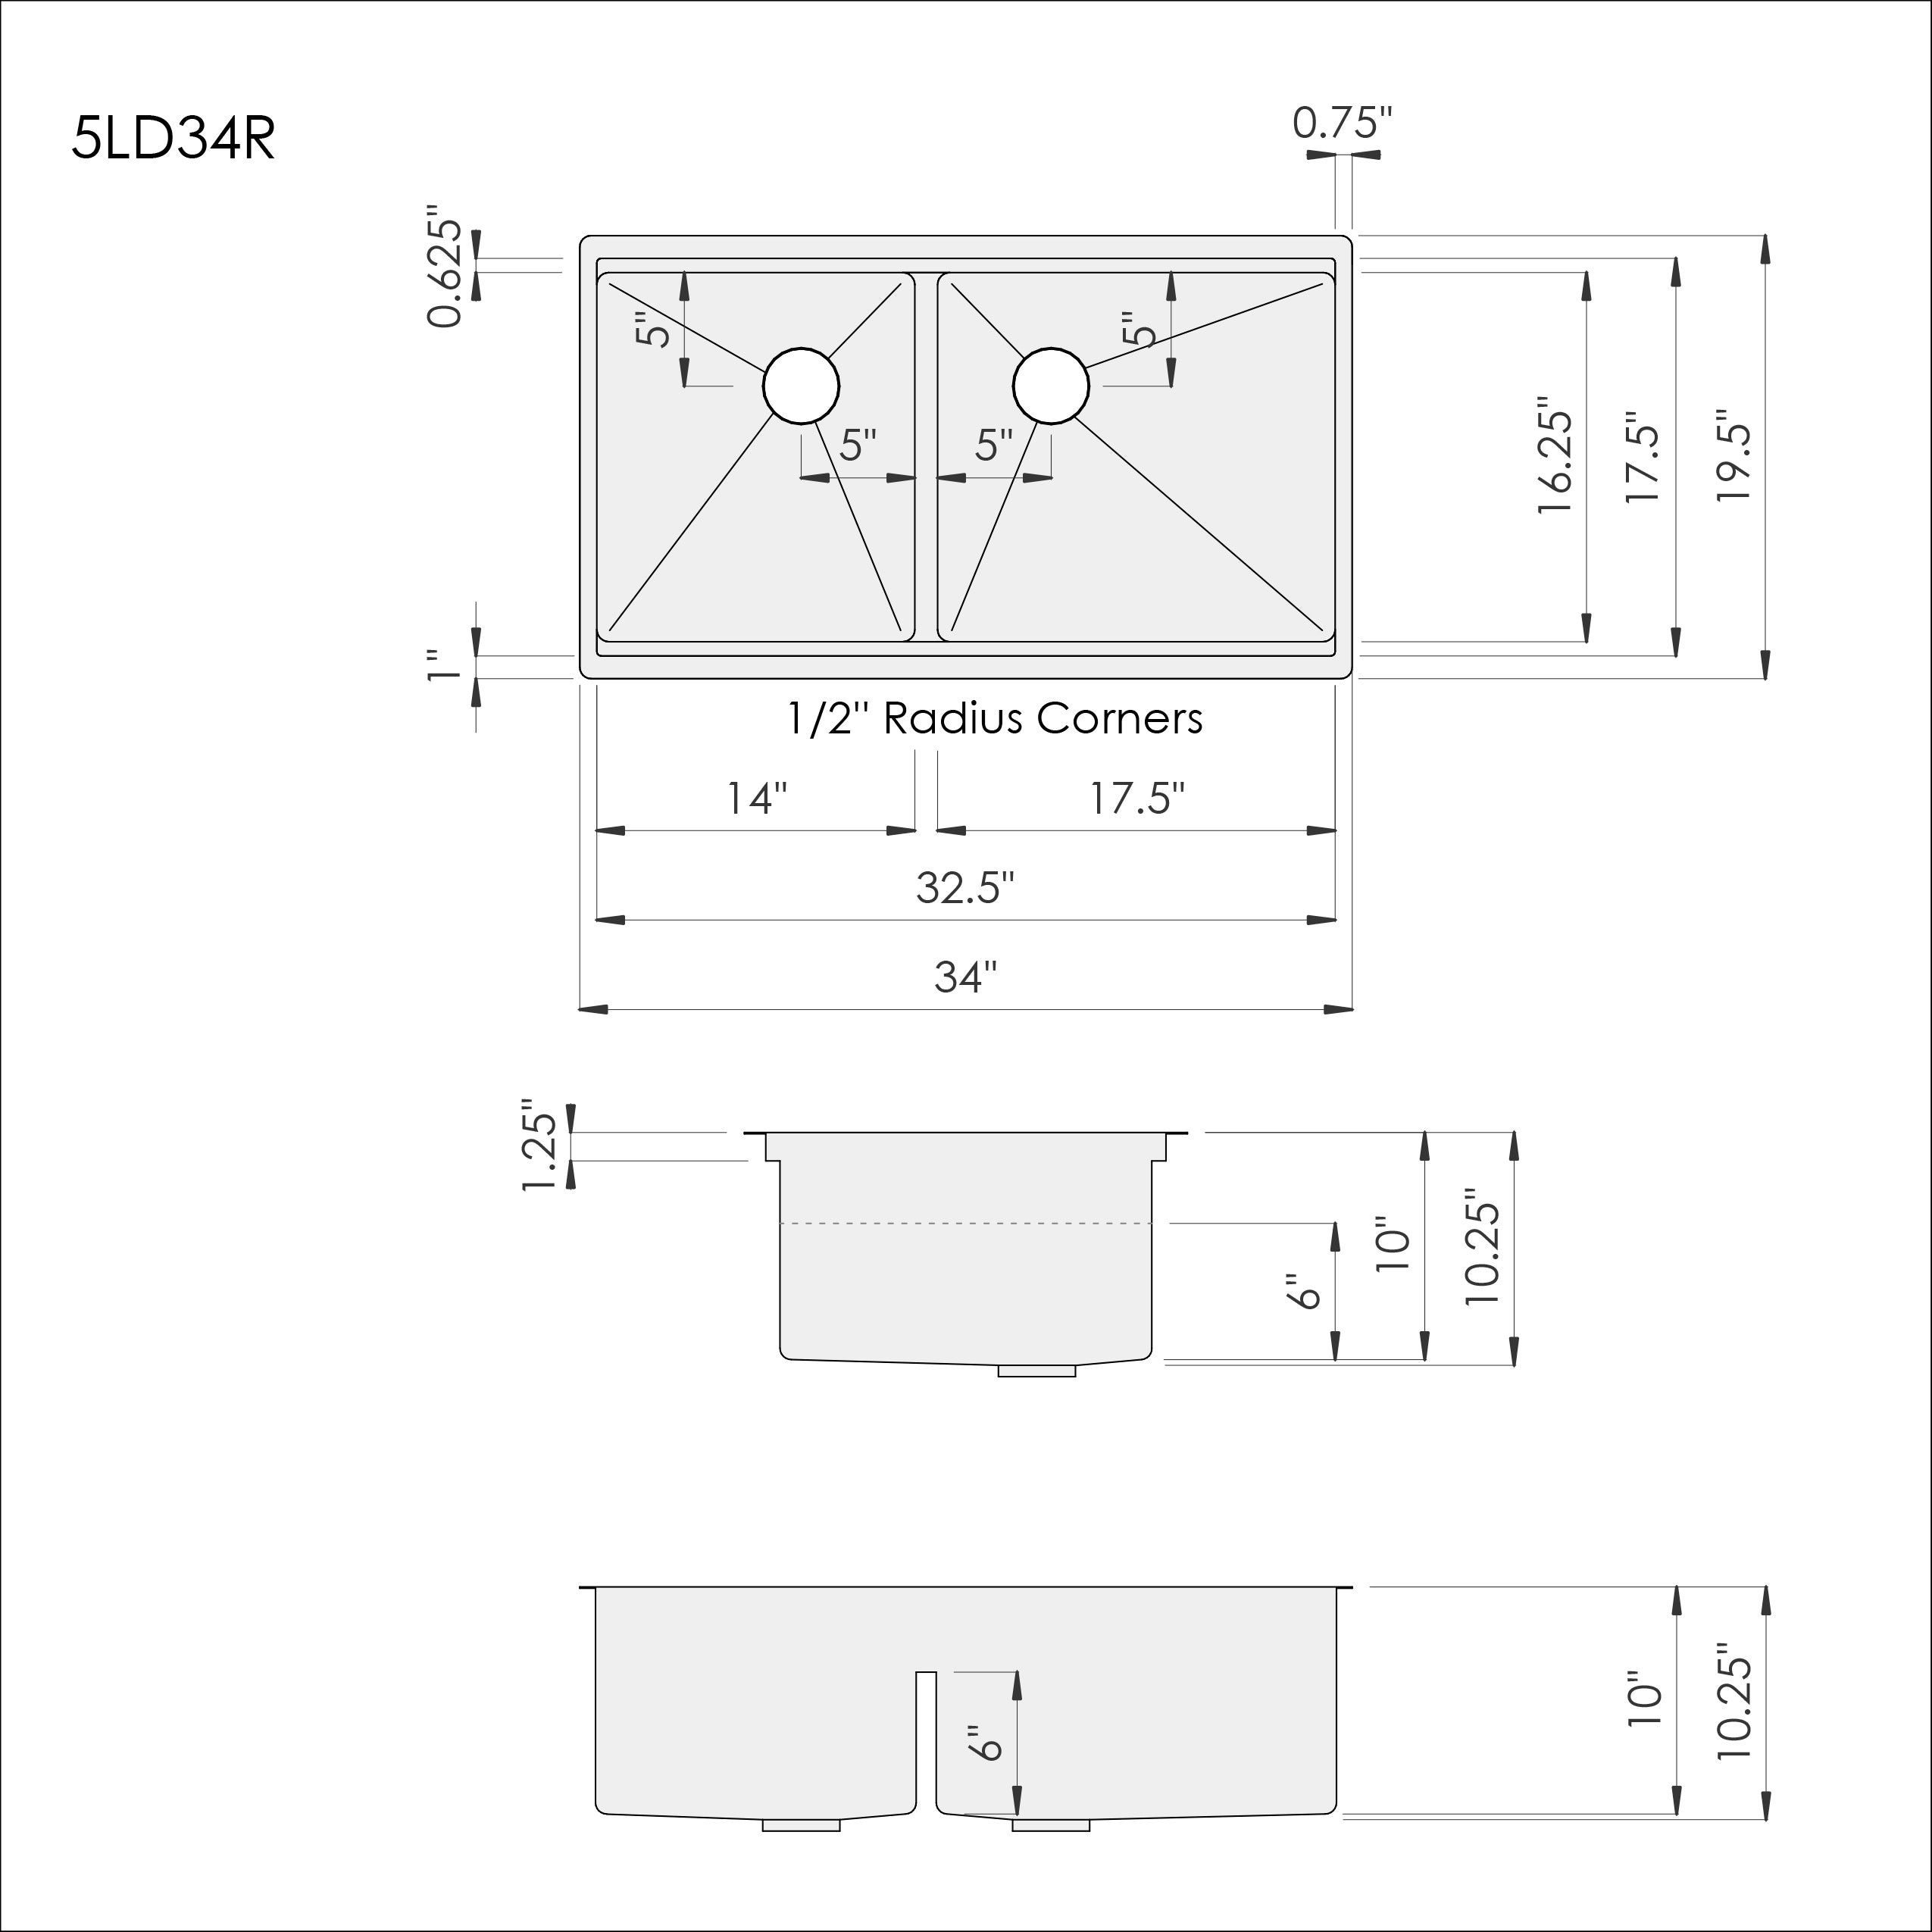 Dimensions of Create Good Sinks 34 inch stainless steel workstation kitchen sink. Double bowl sink with large bowl on the right. Patented seamless drain and half inch radius corners. Smart low divider.